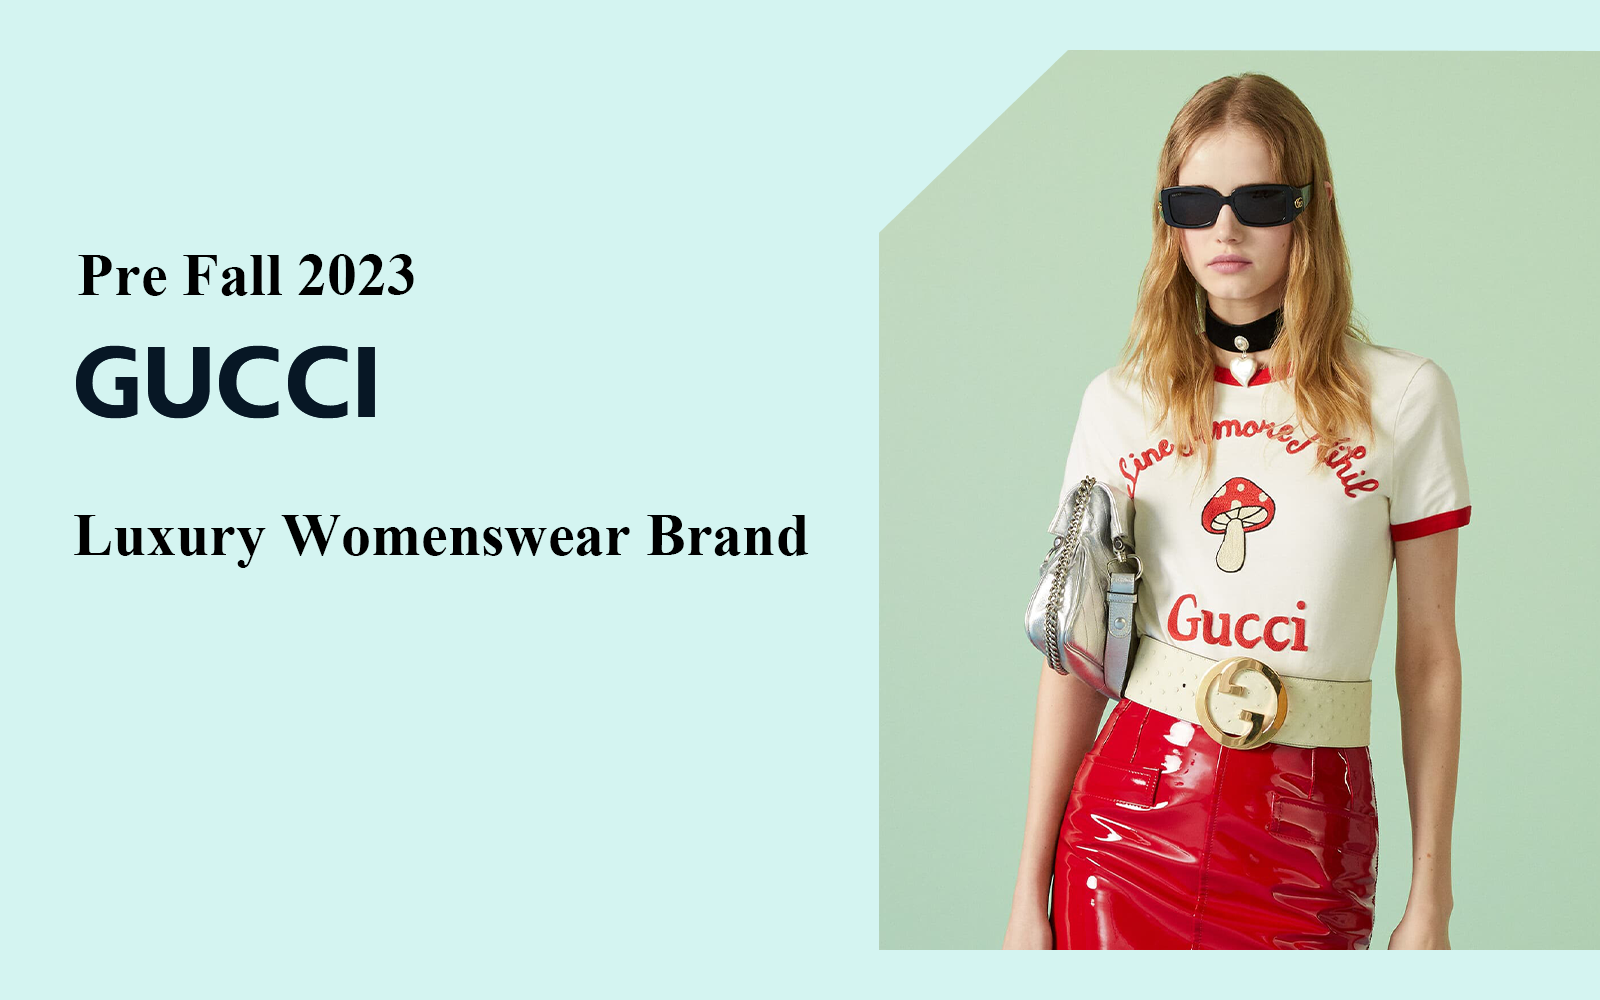 The Analysis of GUCCI The Luxury Womenswear Brand